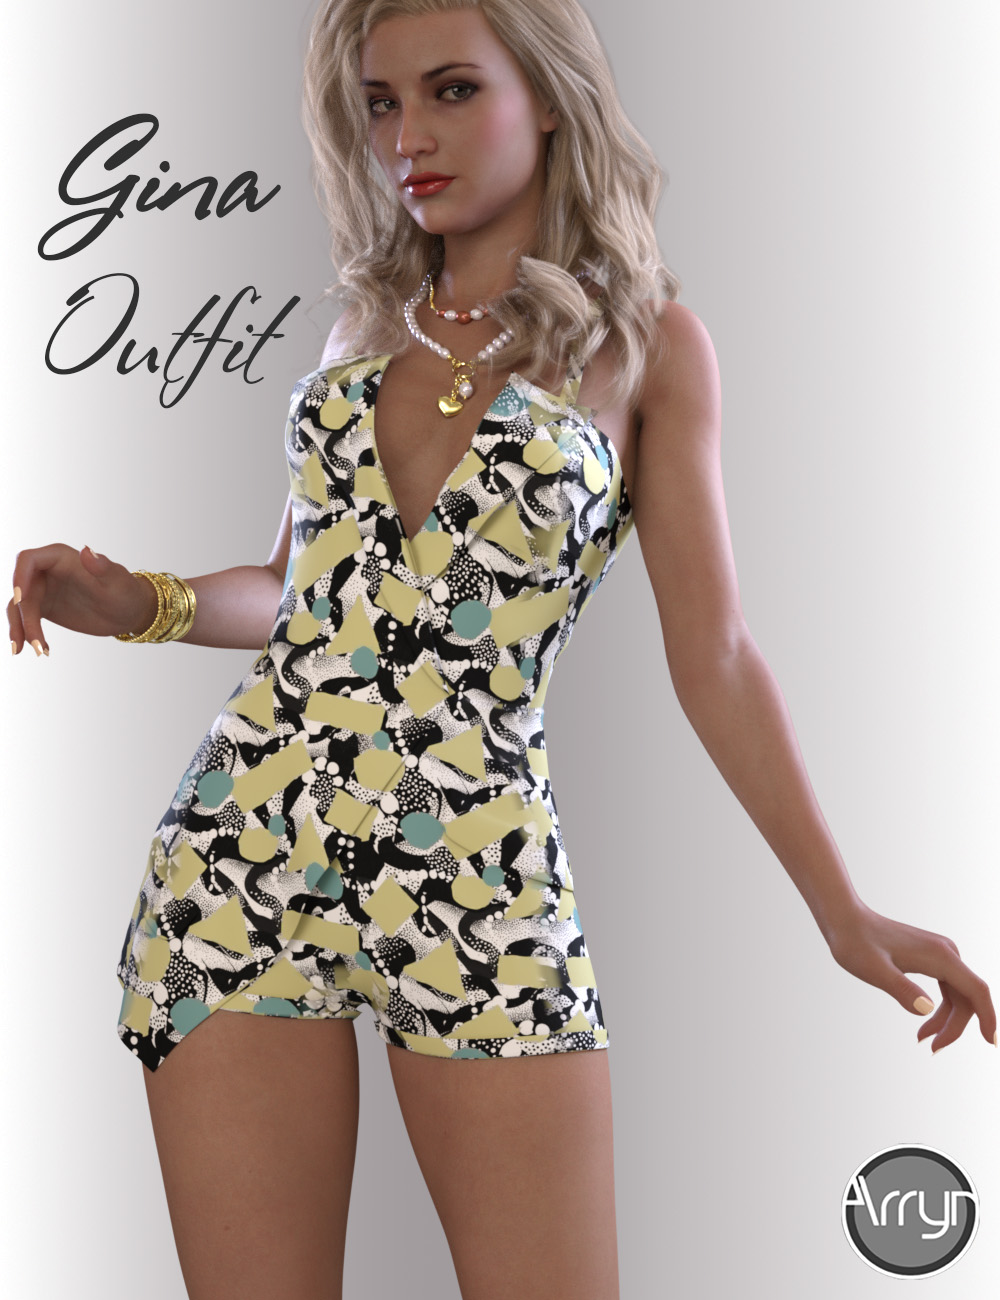 dForce Gina Outfit for Genesis 8.1 Females by: OnnelArryn, 3D Models by Daz 3D